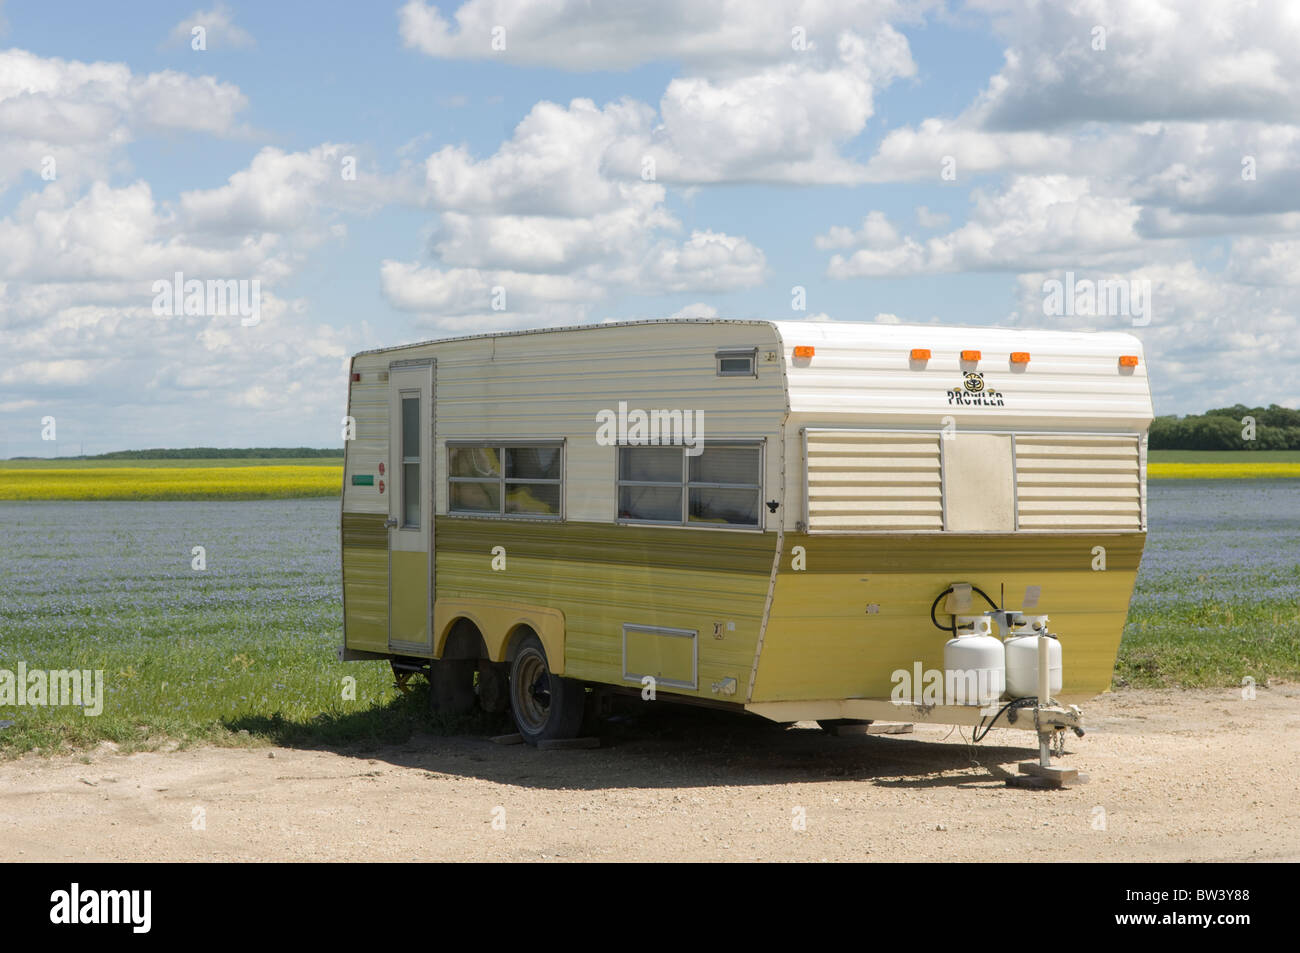 Camper trailer parked at side of alfalfa and canola field near Winnipeg, Manitoba, Canada Stock Photo